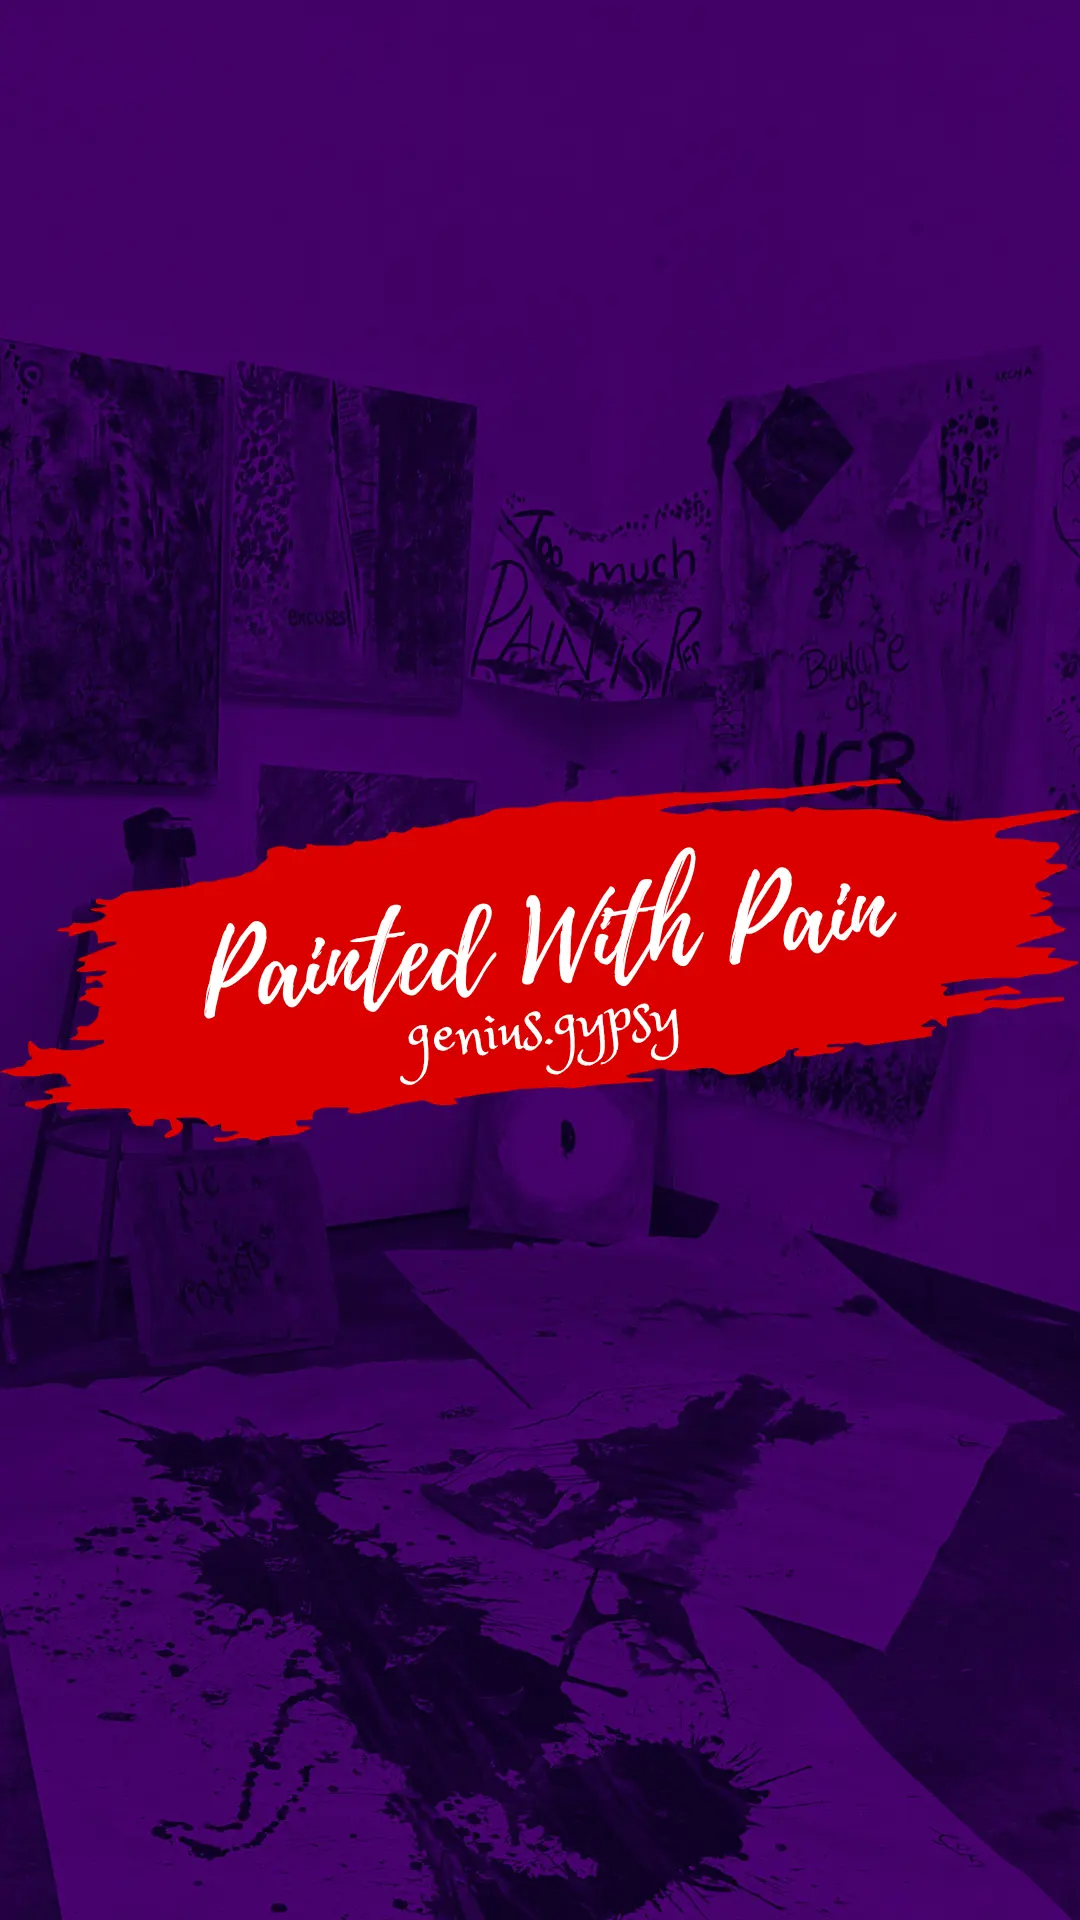 Painted with PAIN?